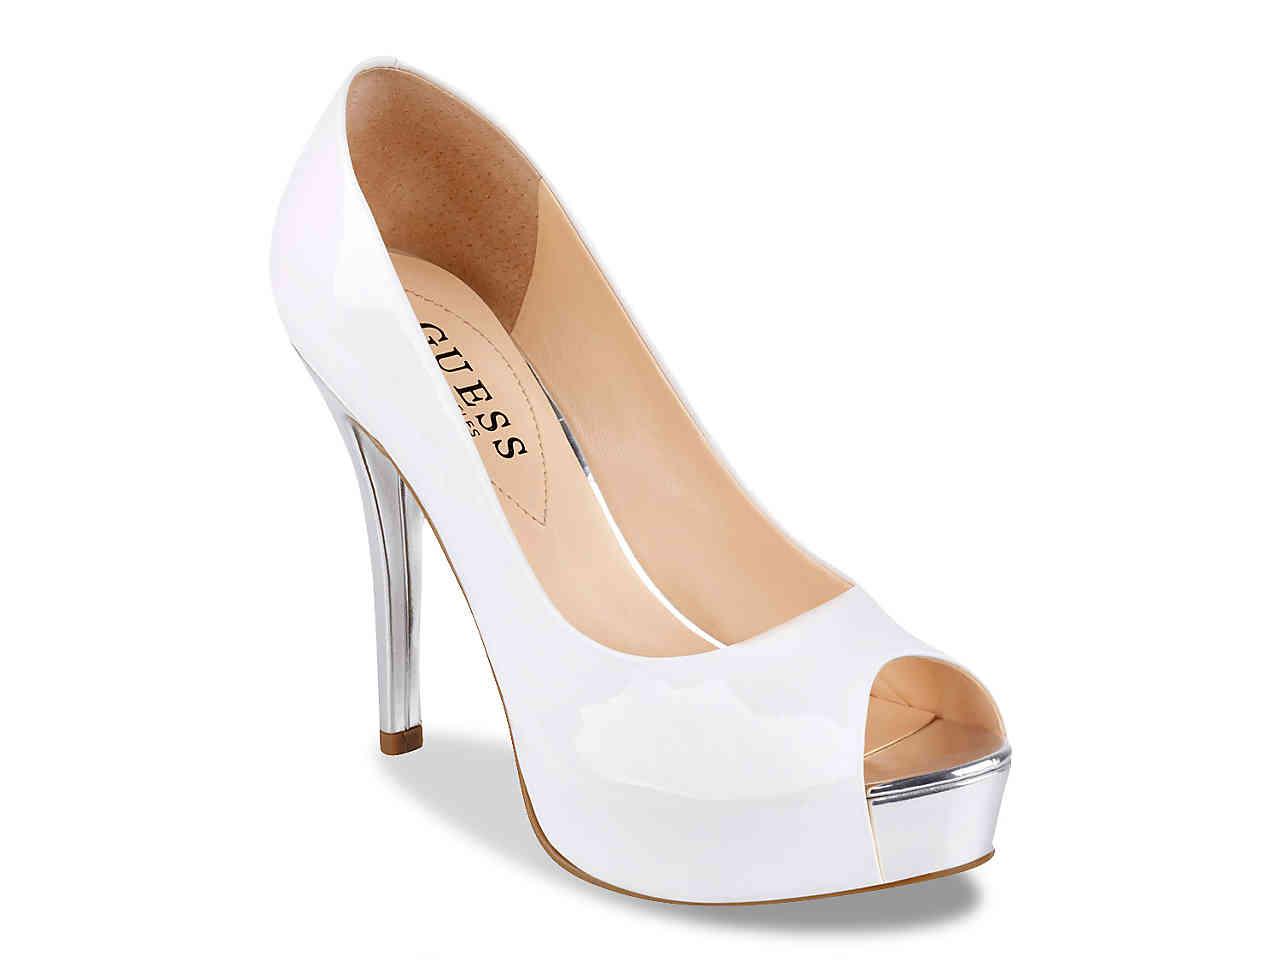 Guess Patches Platform Pump in White - Lyst